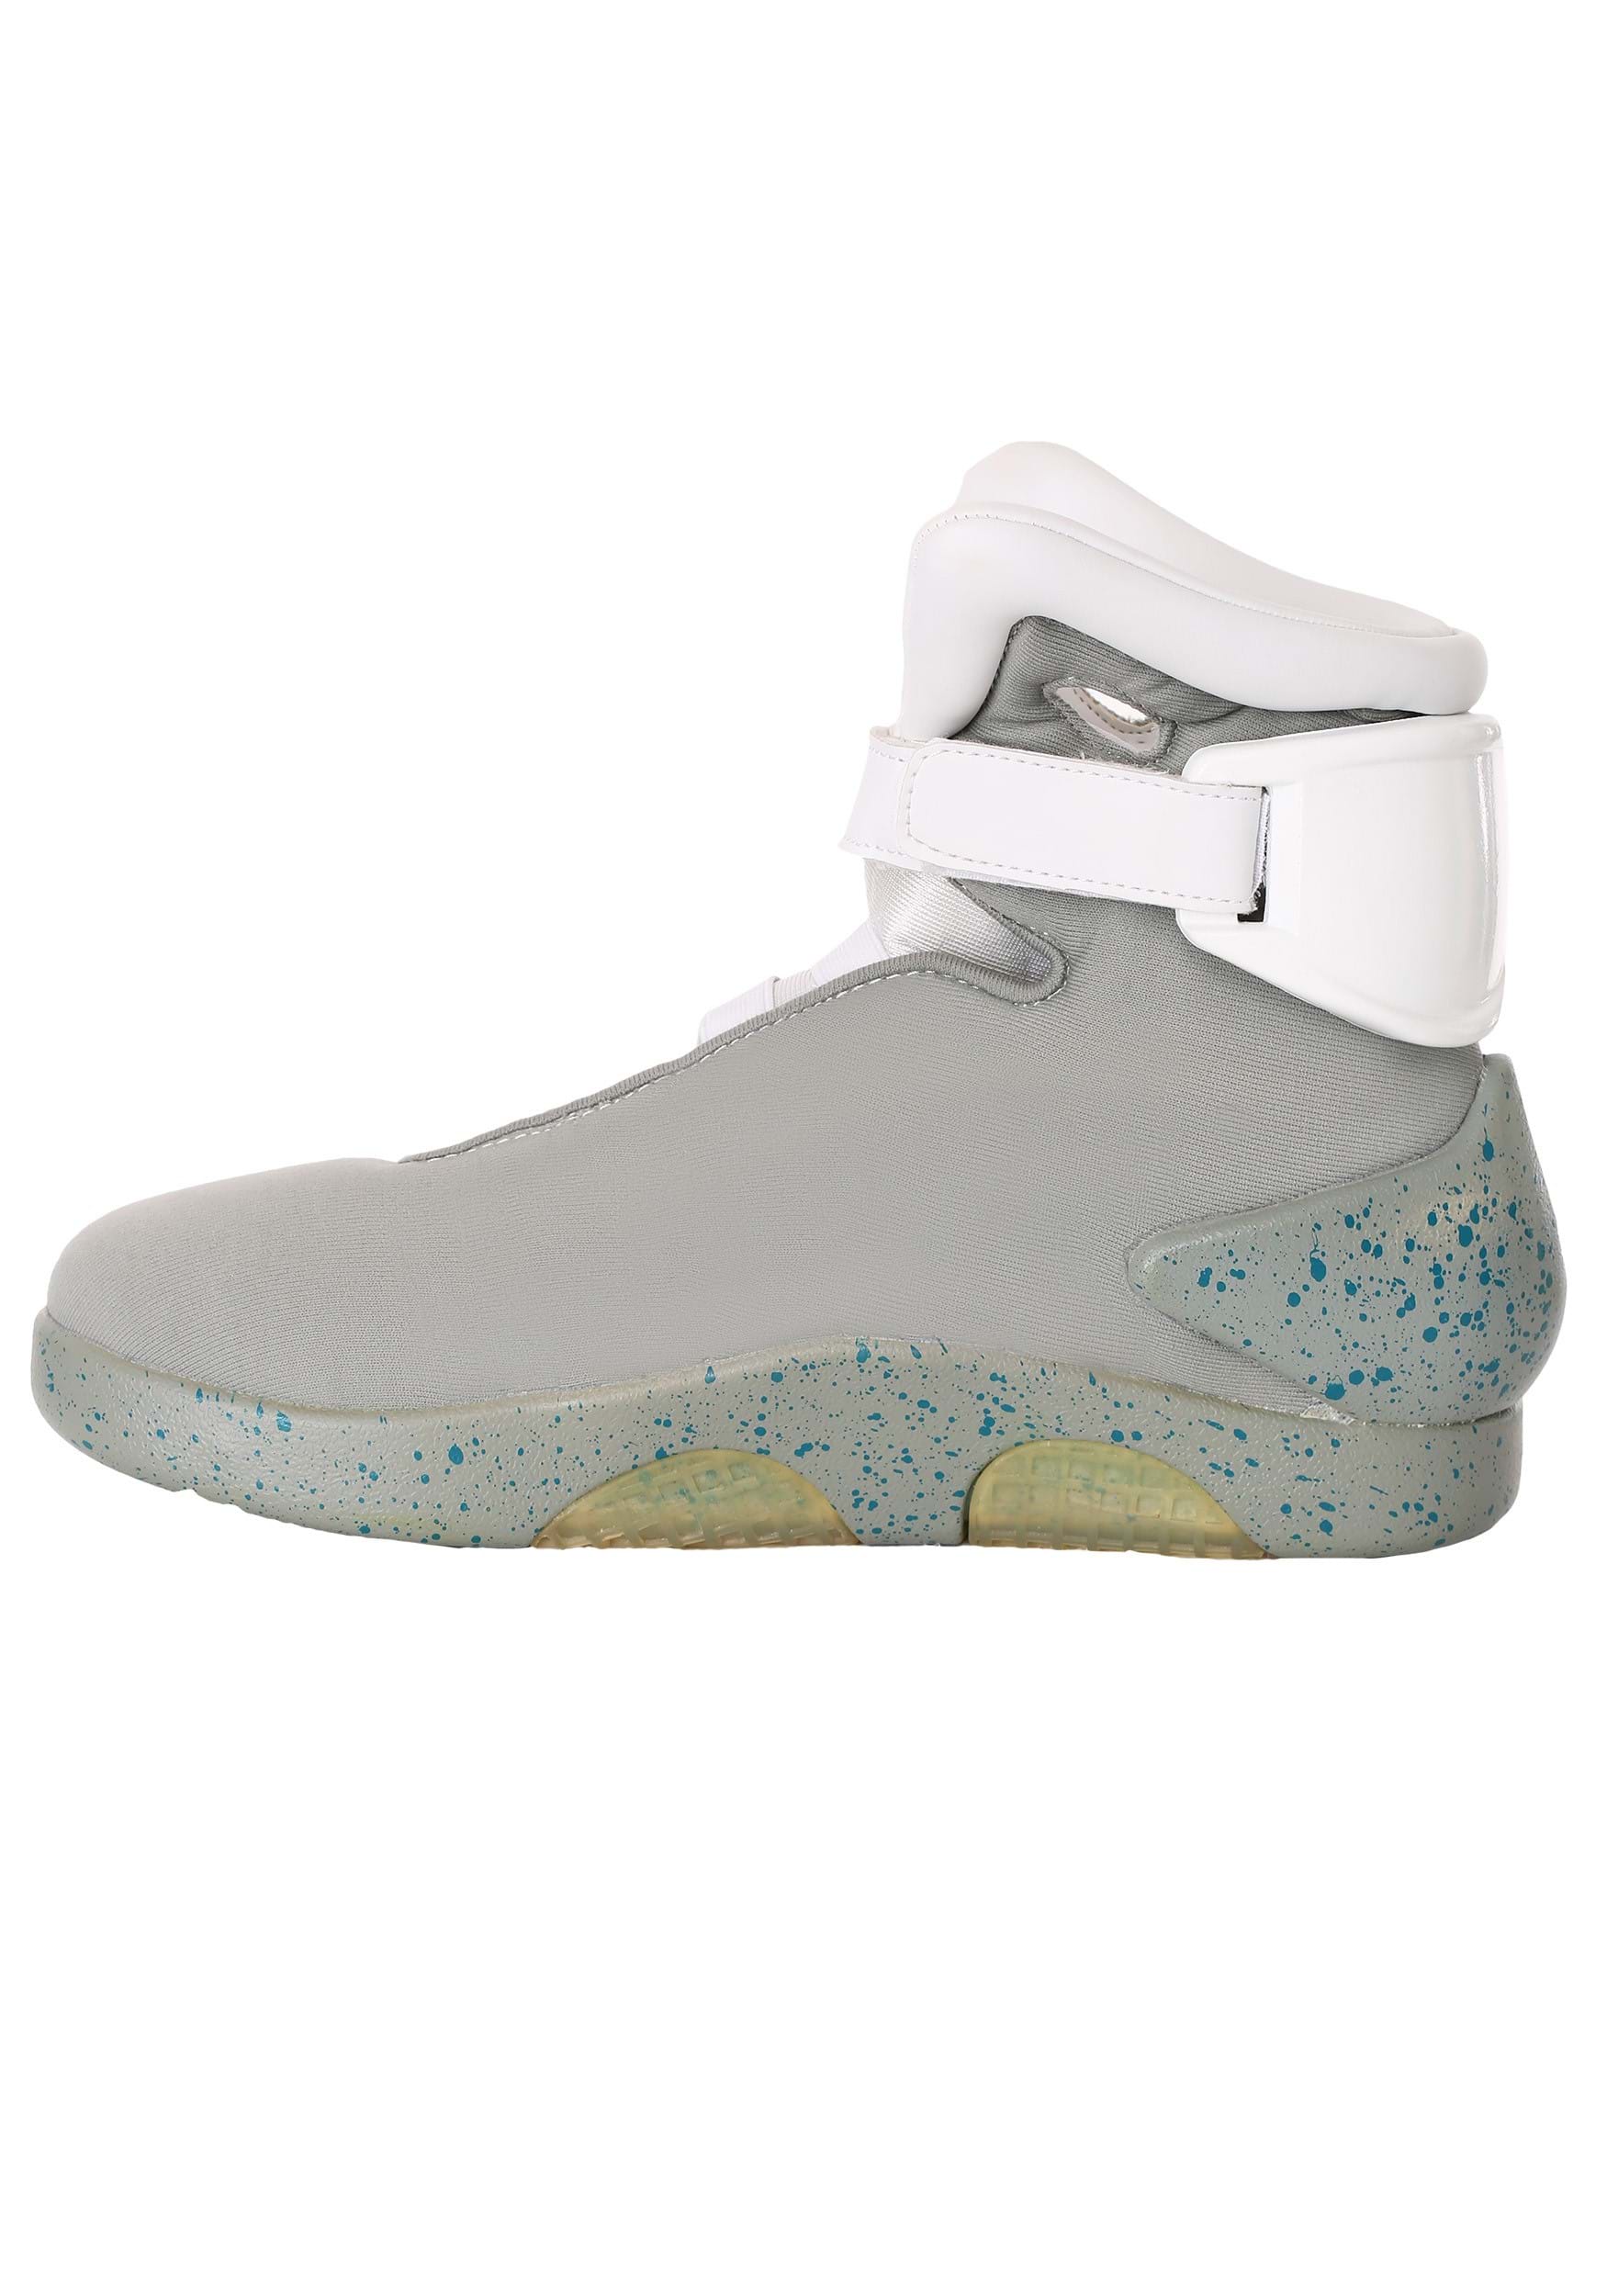 Back To The Future Part II Light Up Shoes , Back To The Future Costumes